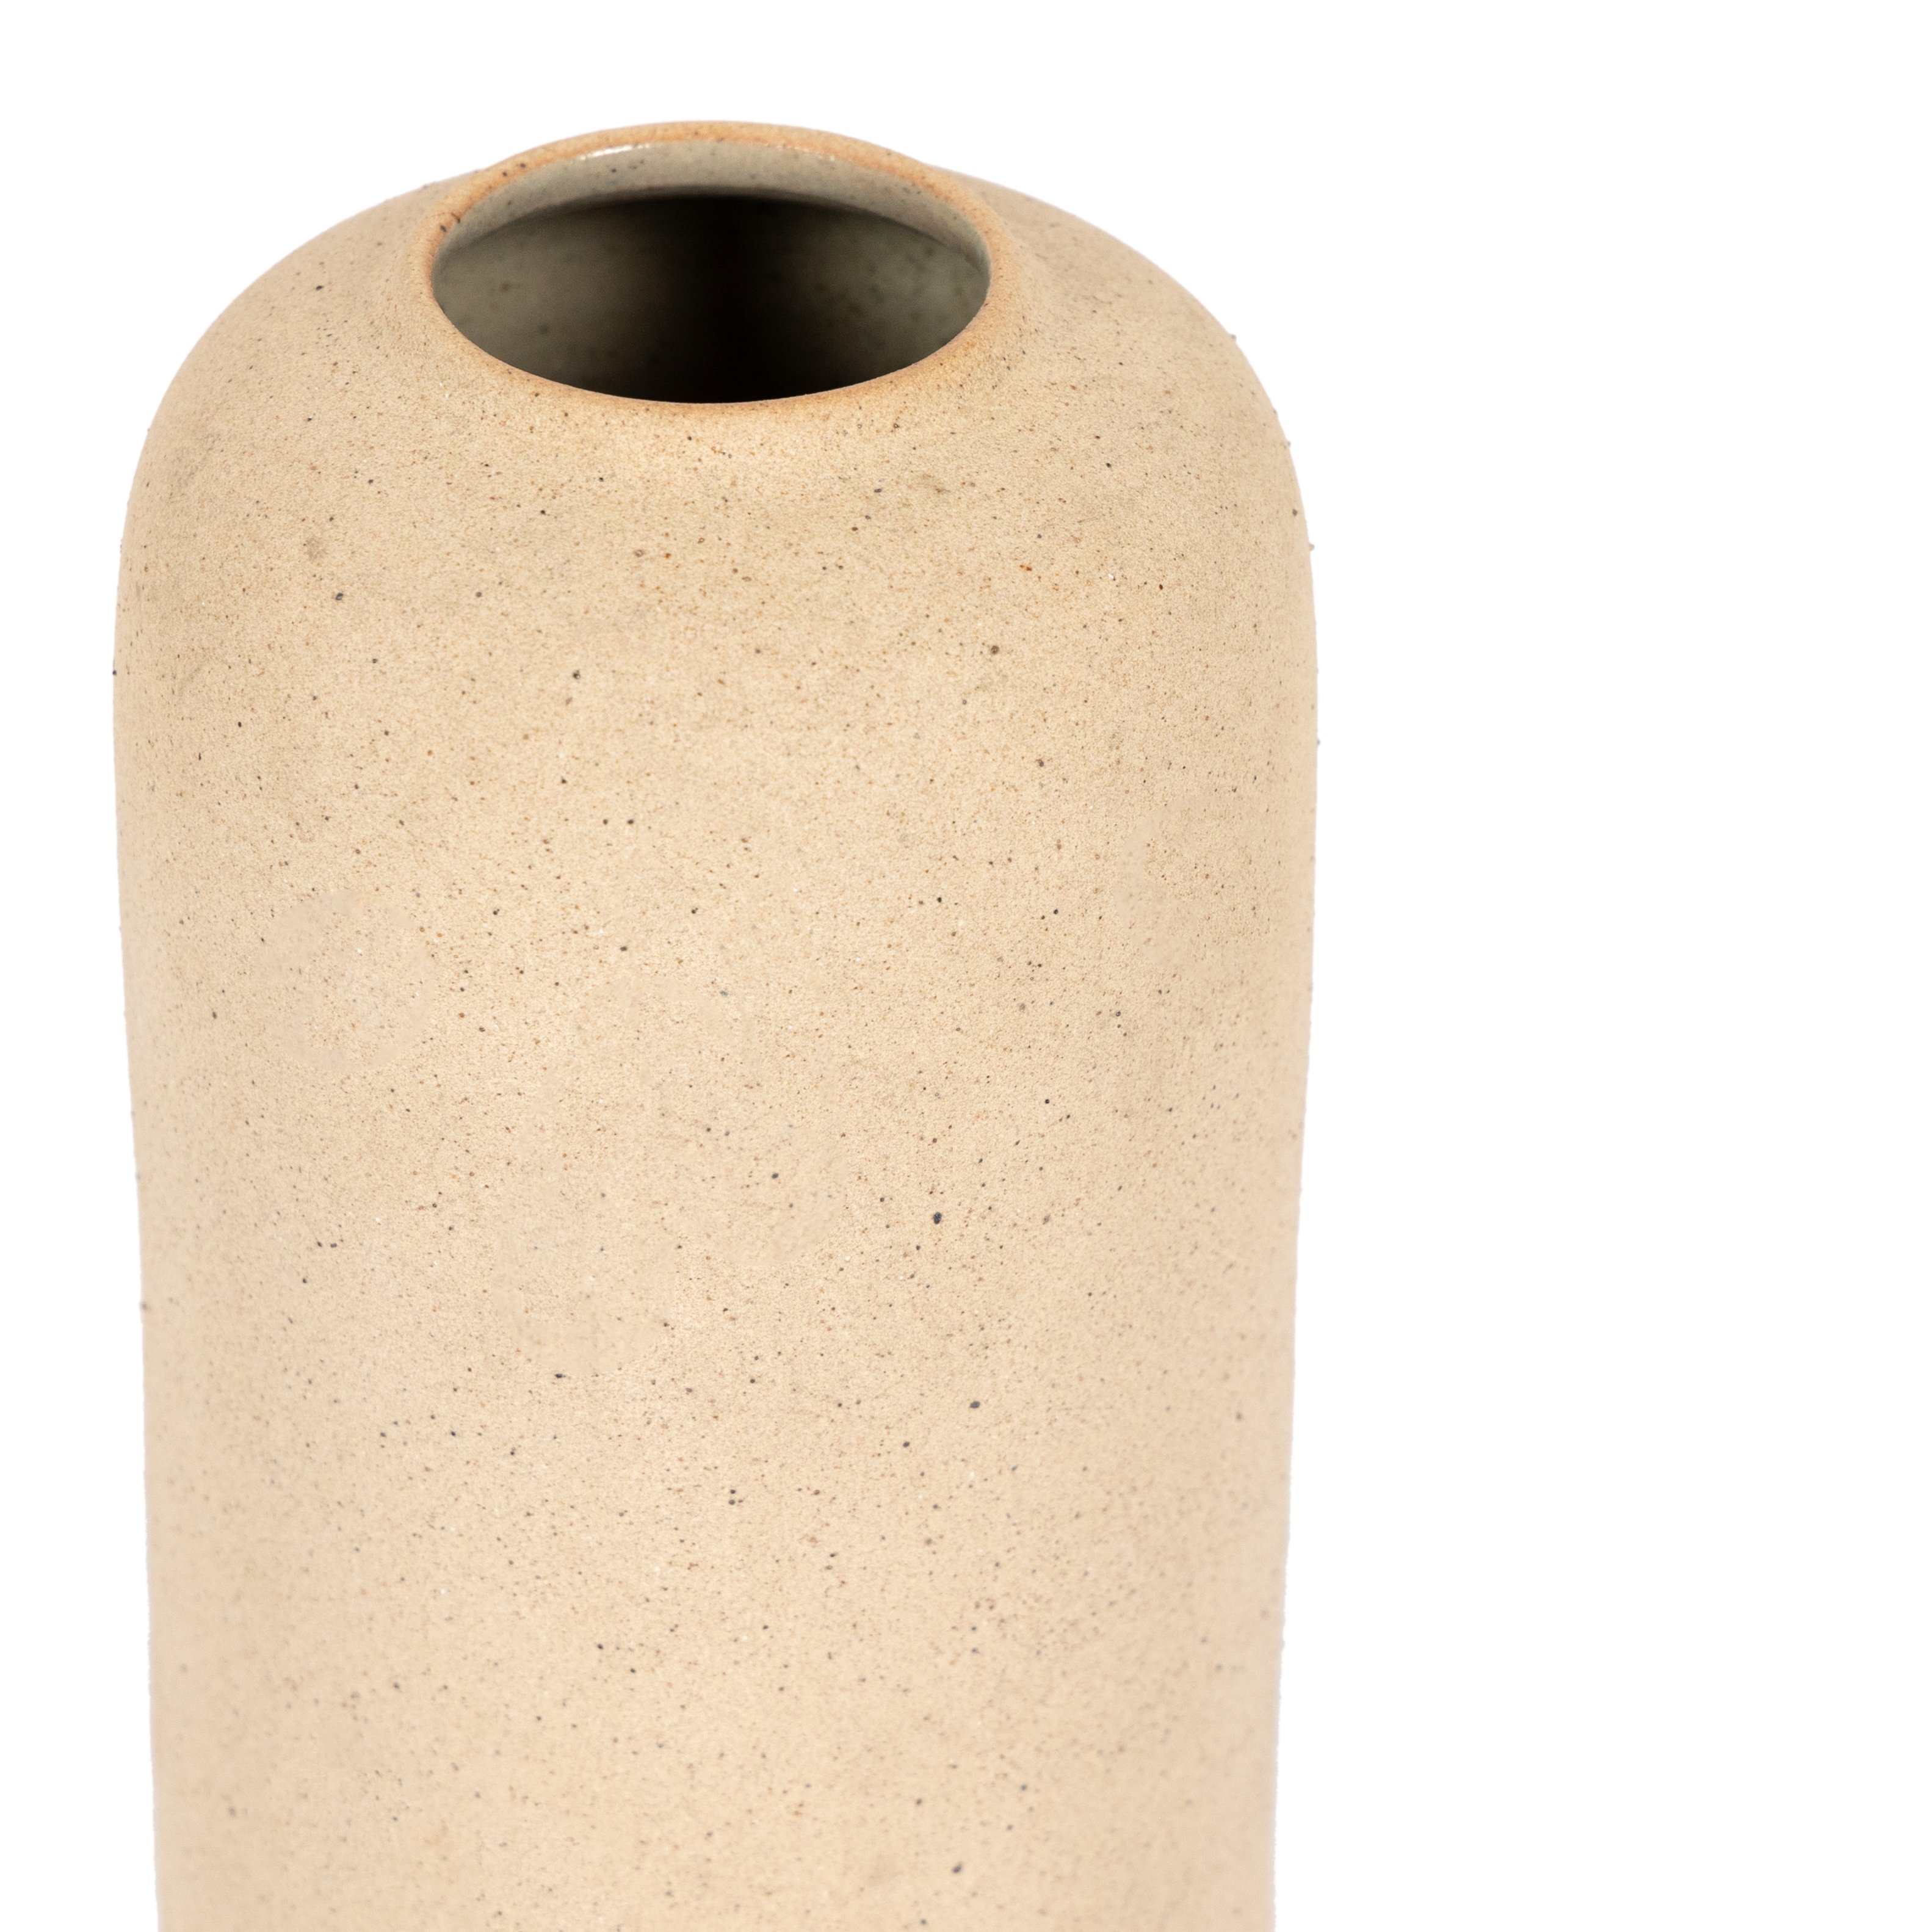 Evalia Tall Vase-Natural Speckled Clay - Image 2